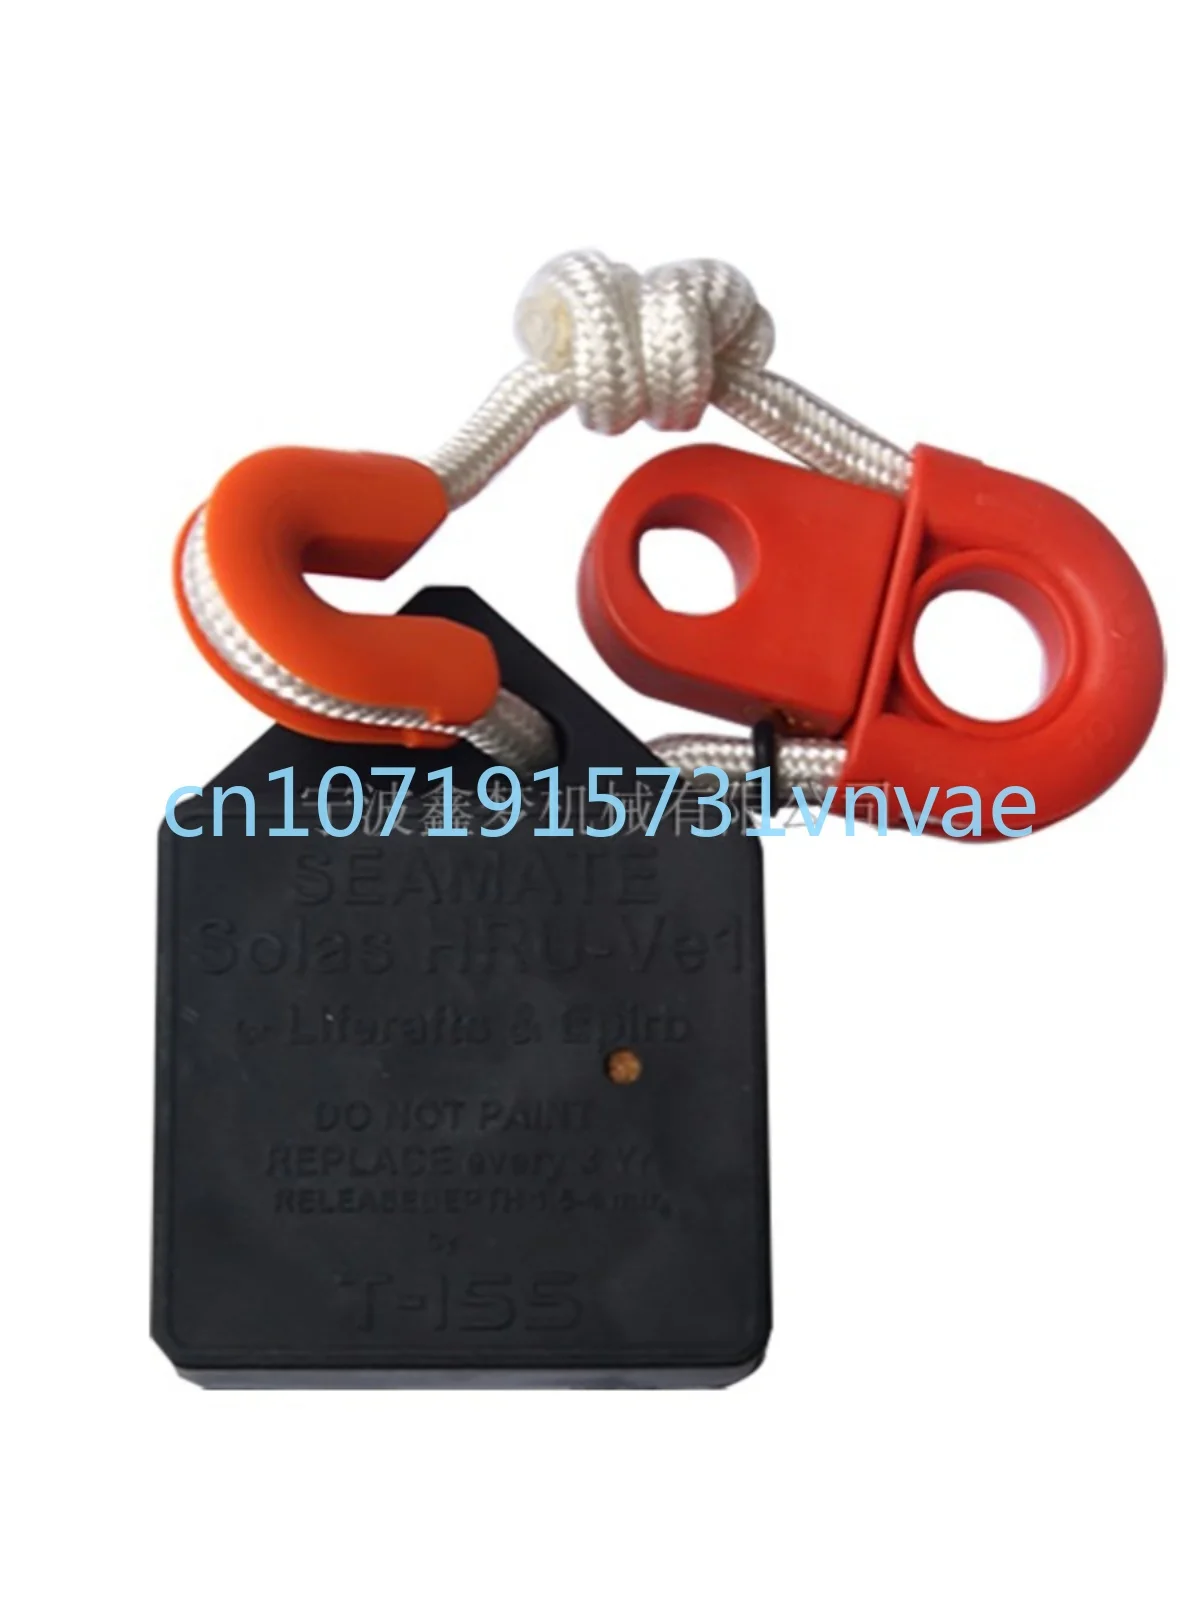 

IMPA330119 Life Raft Discharge Device Hydrostatic Pressure Marine Life-Saving SEAMATE Automatic Release DNV Certificate